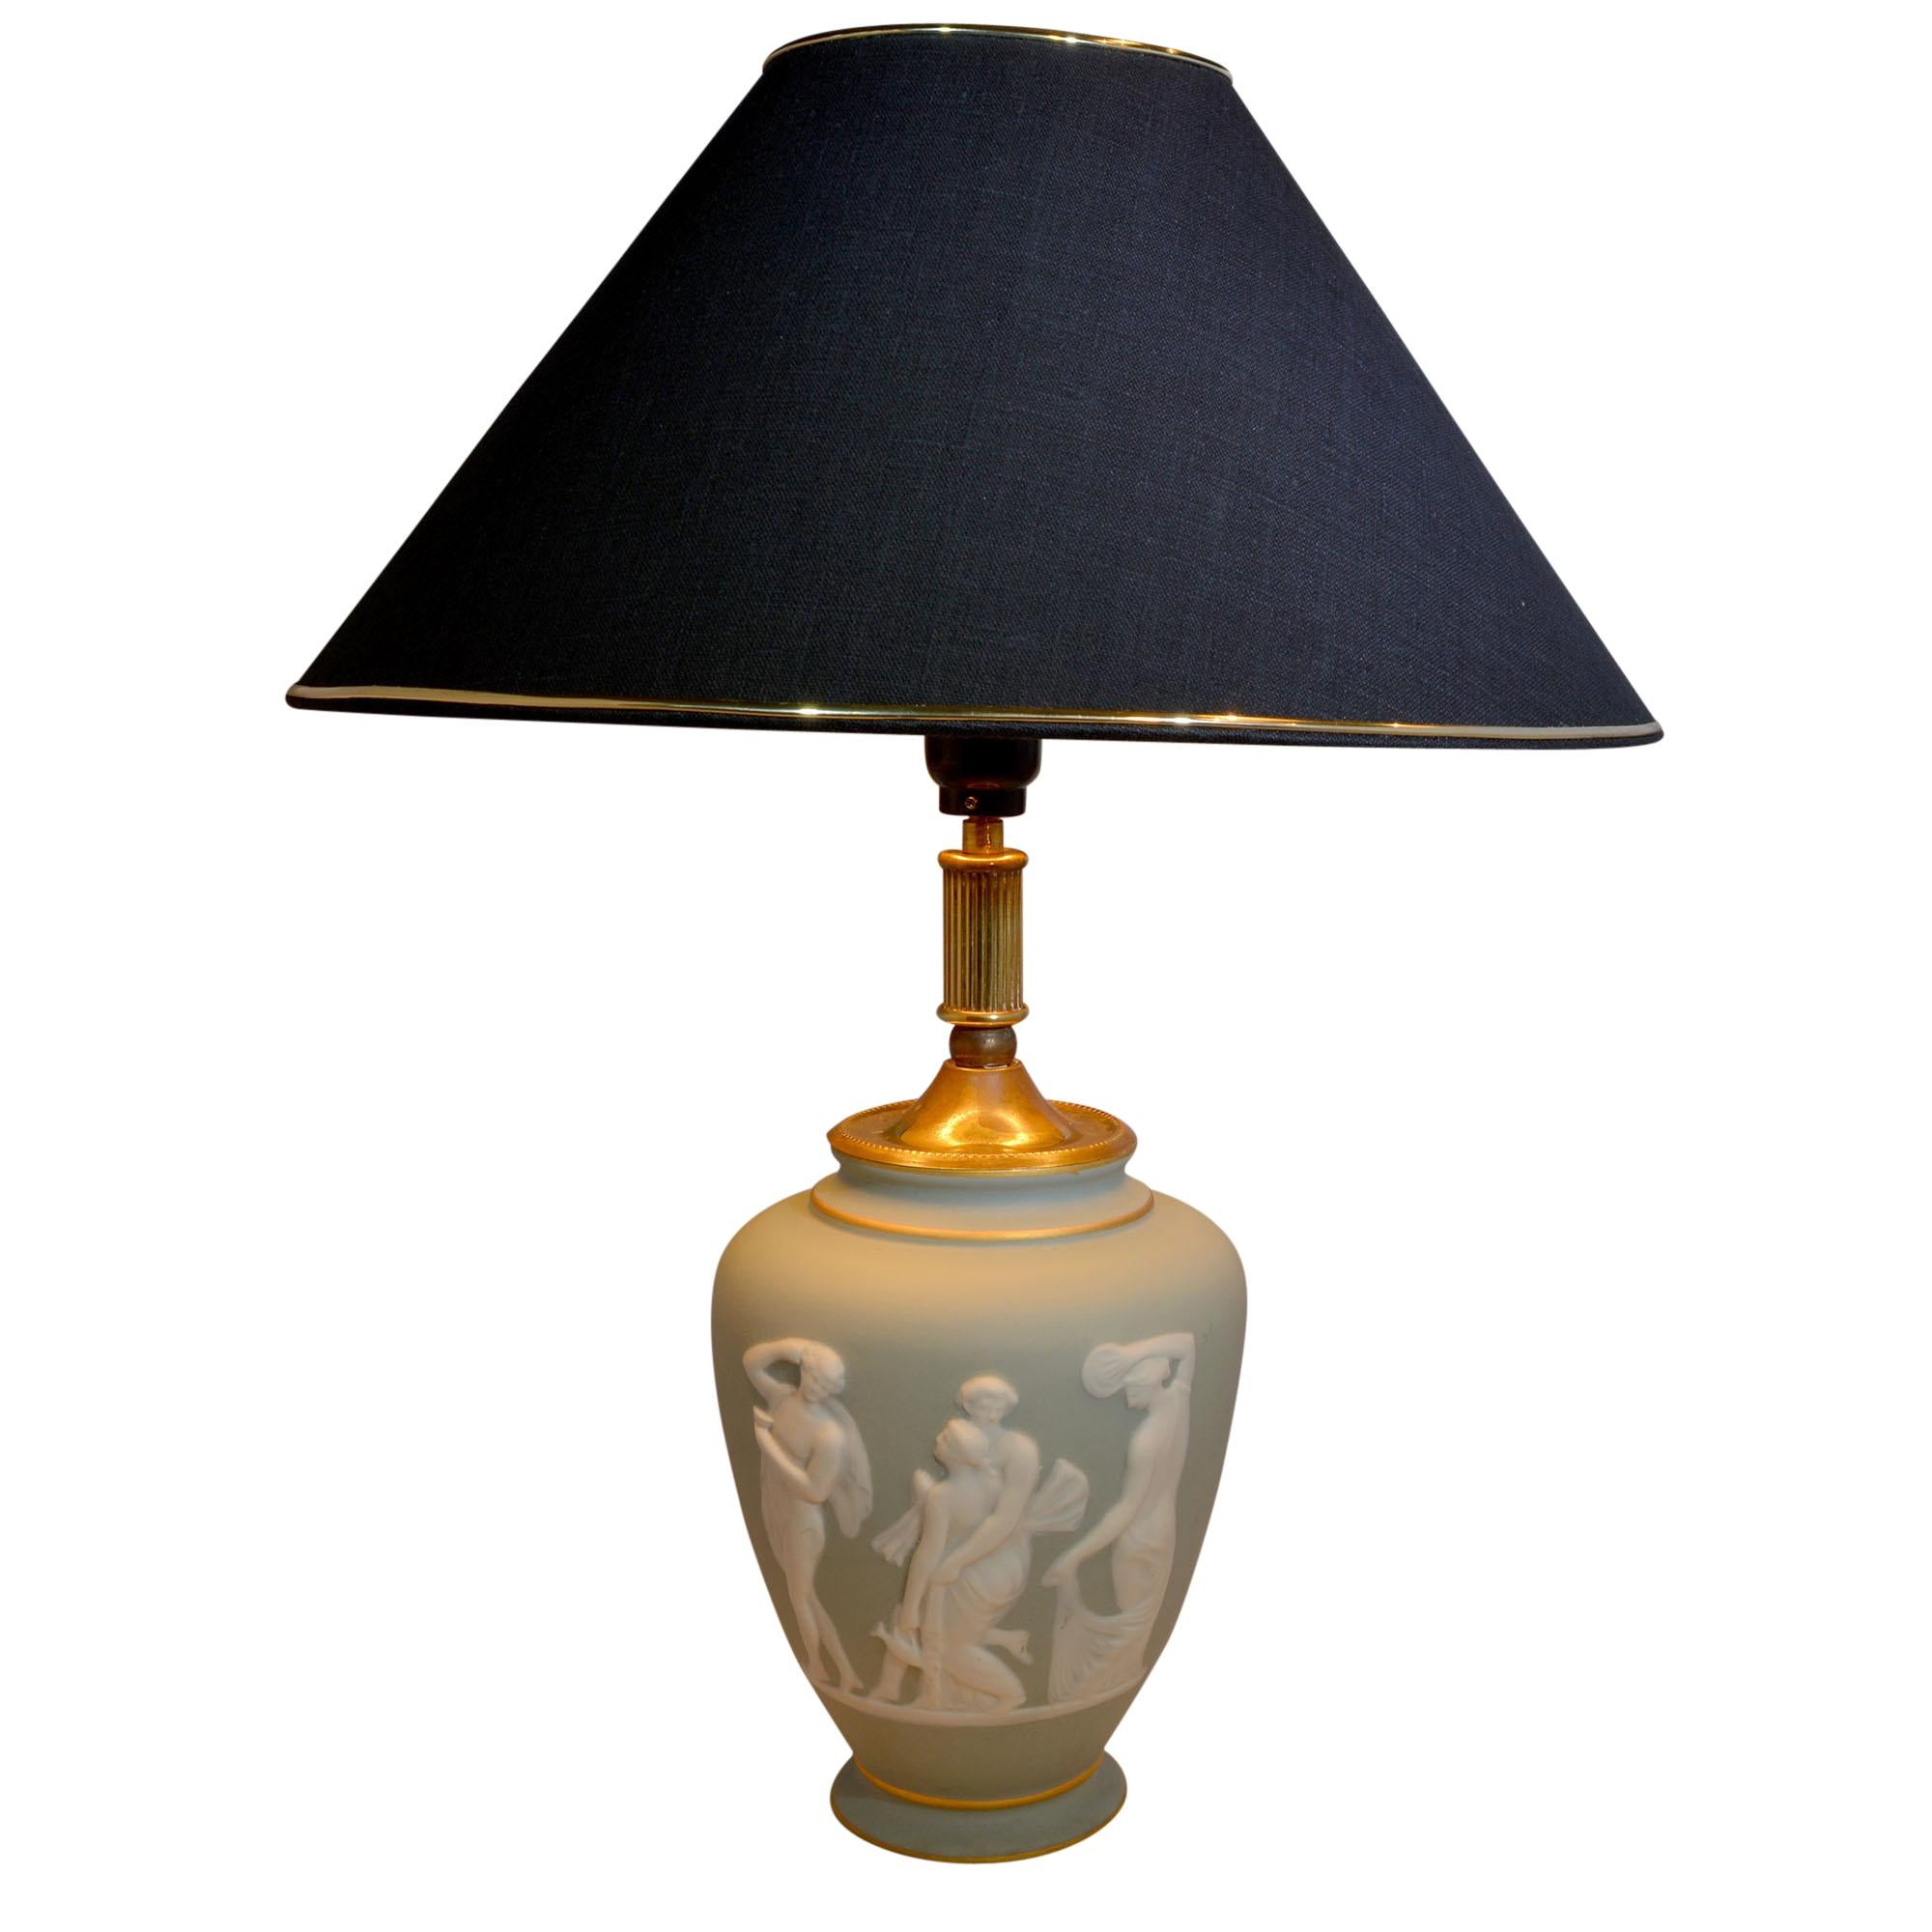 Beautiful soft green base features Pâte-sur-pâte (paste on paste) relief design of Grecian goddesses. The urn shaped body has hand painted French line accents at the bottom and top. The lamp comes with a custom, handmade shade. The shade is black